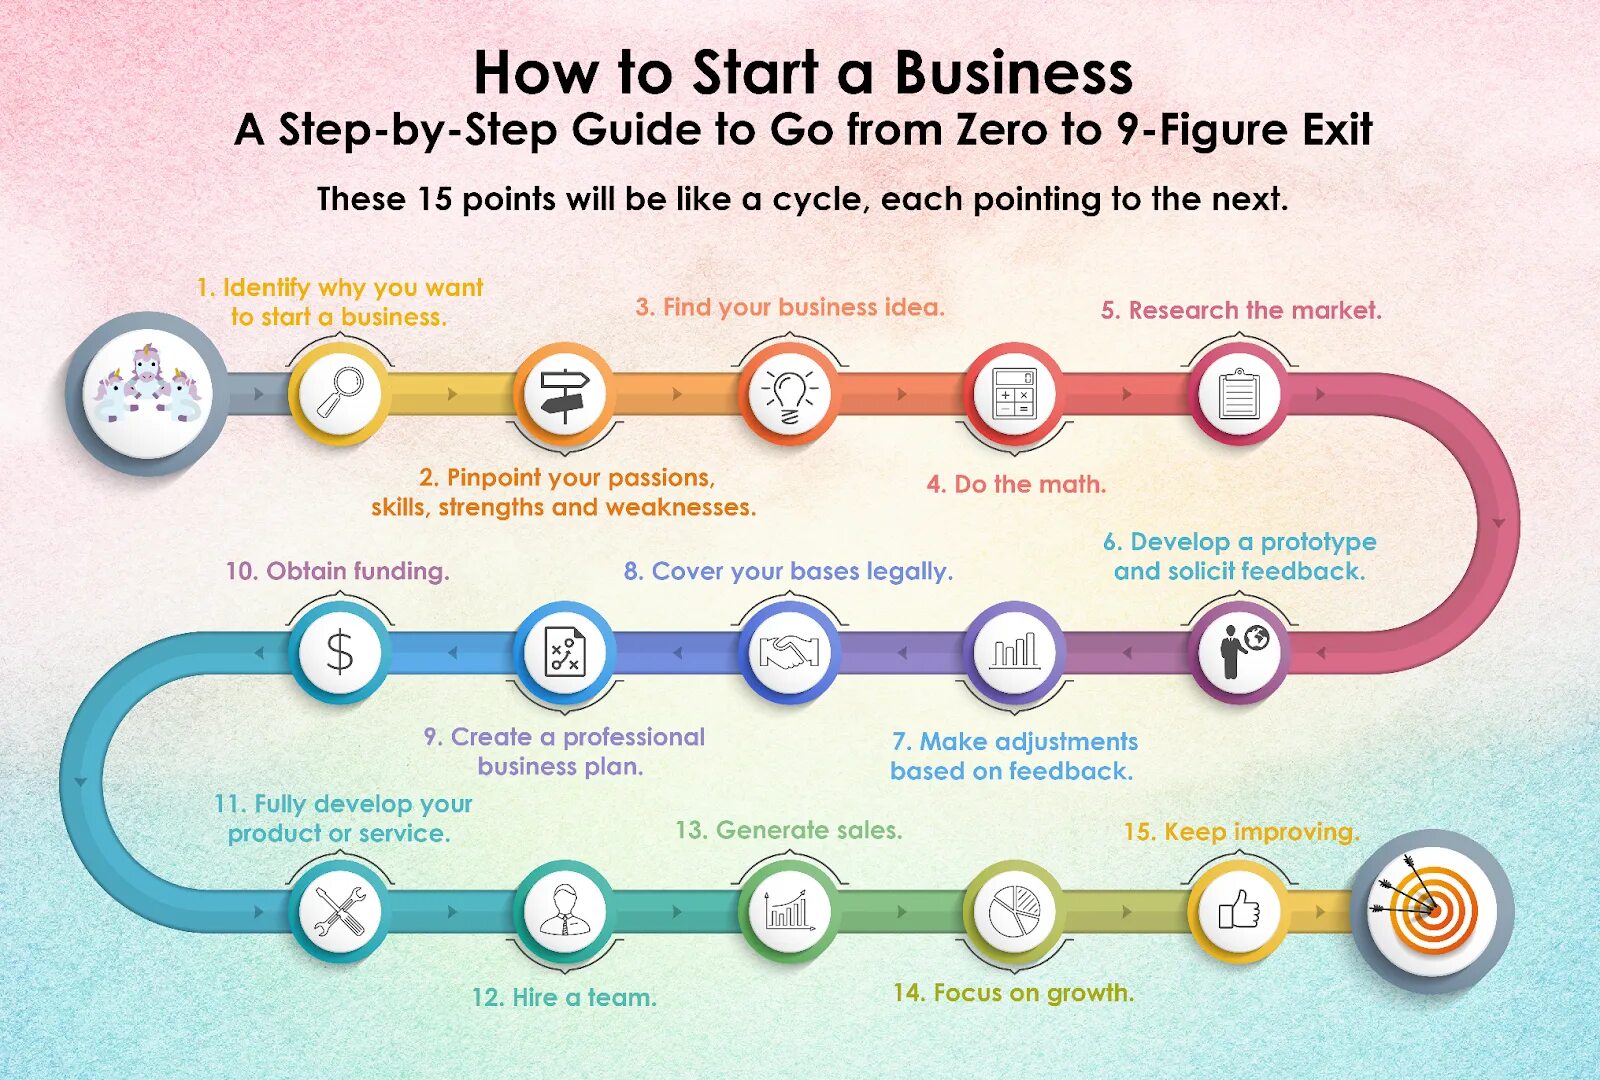 How to live better. How to start a Business. How to start your Business. Start up and New Business. Business Plan steps.